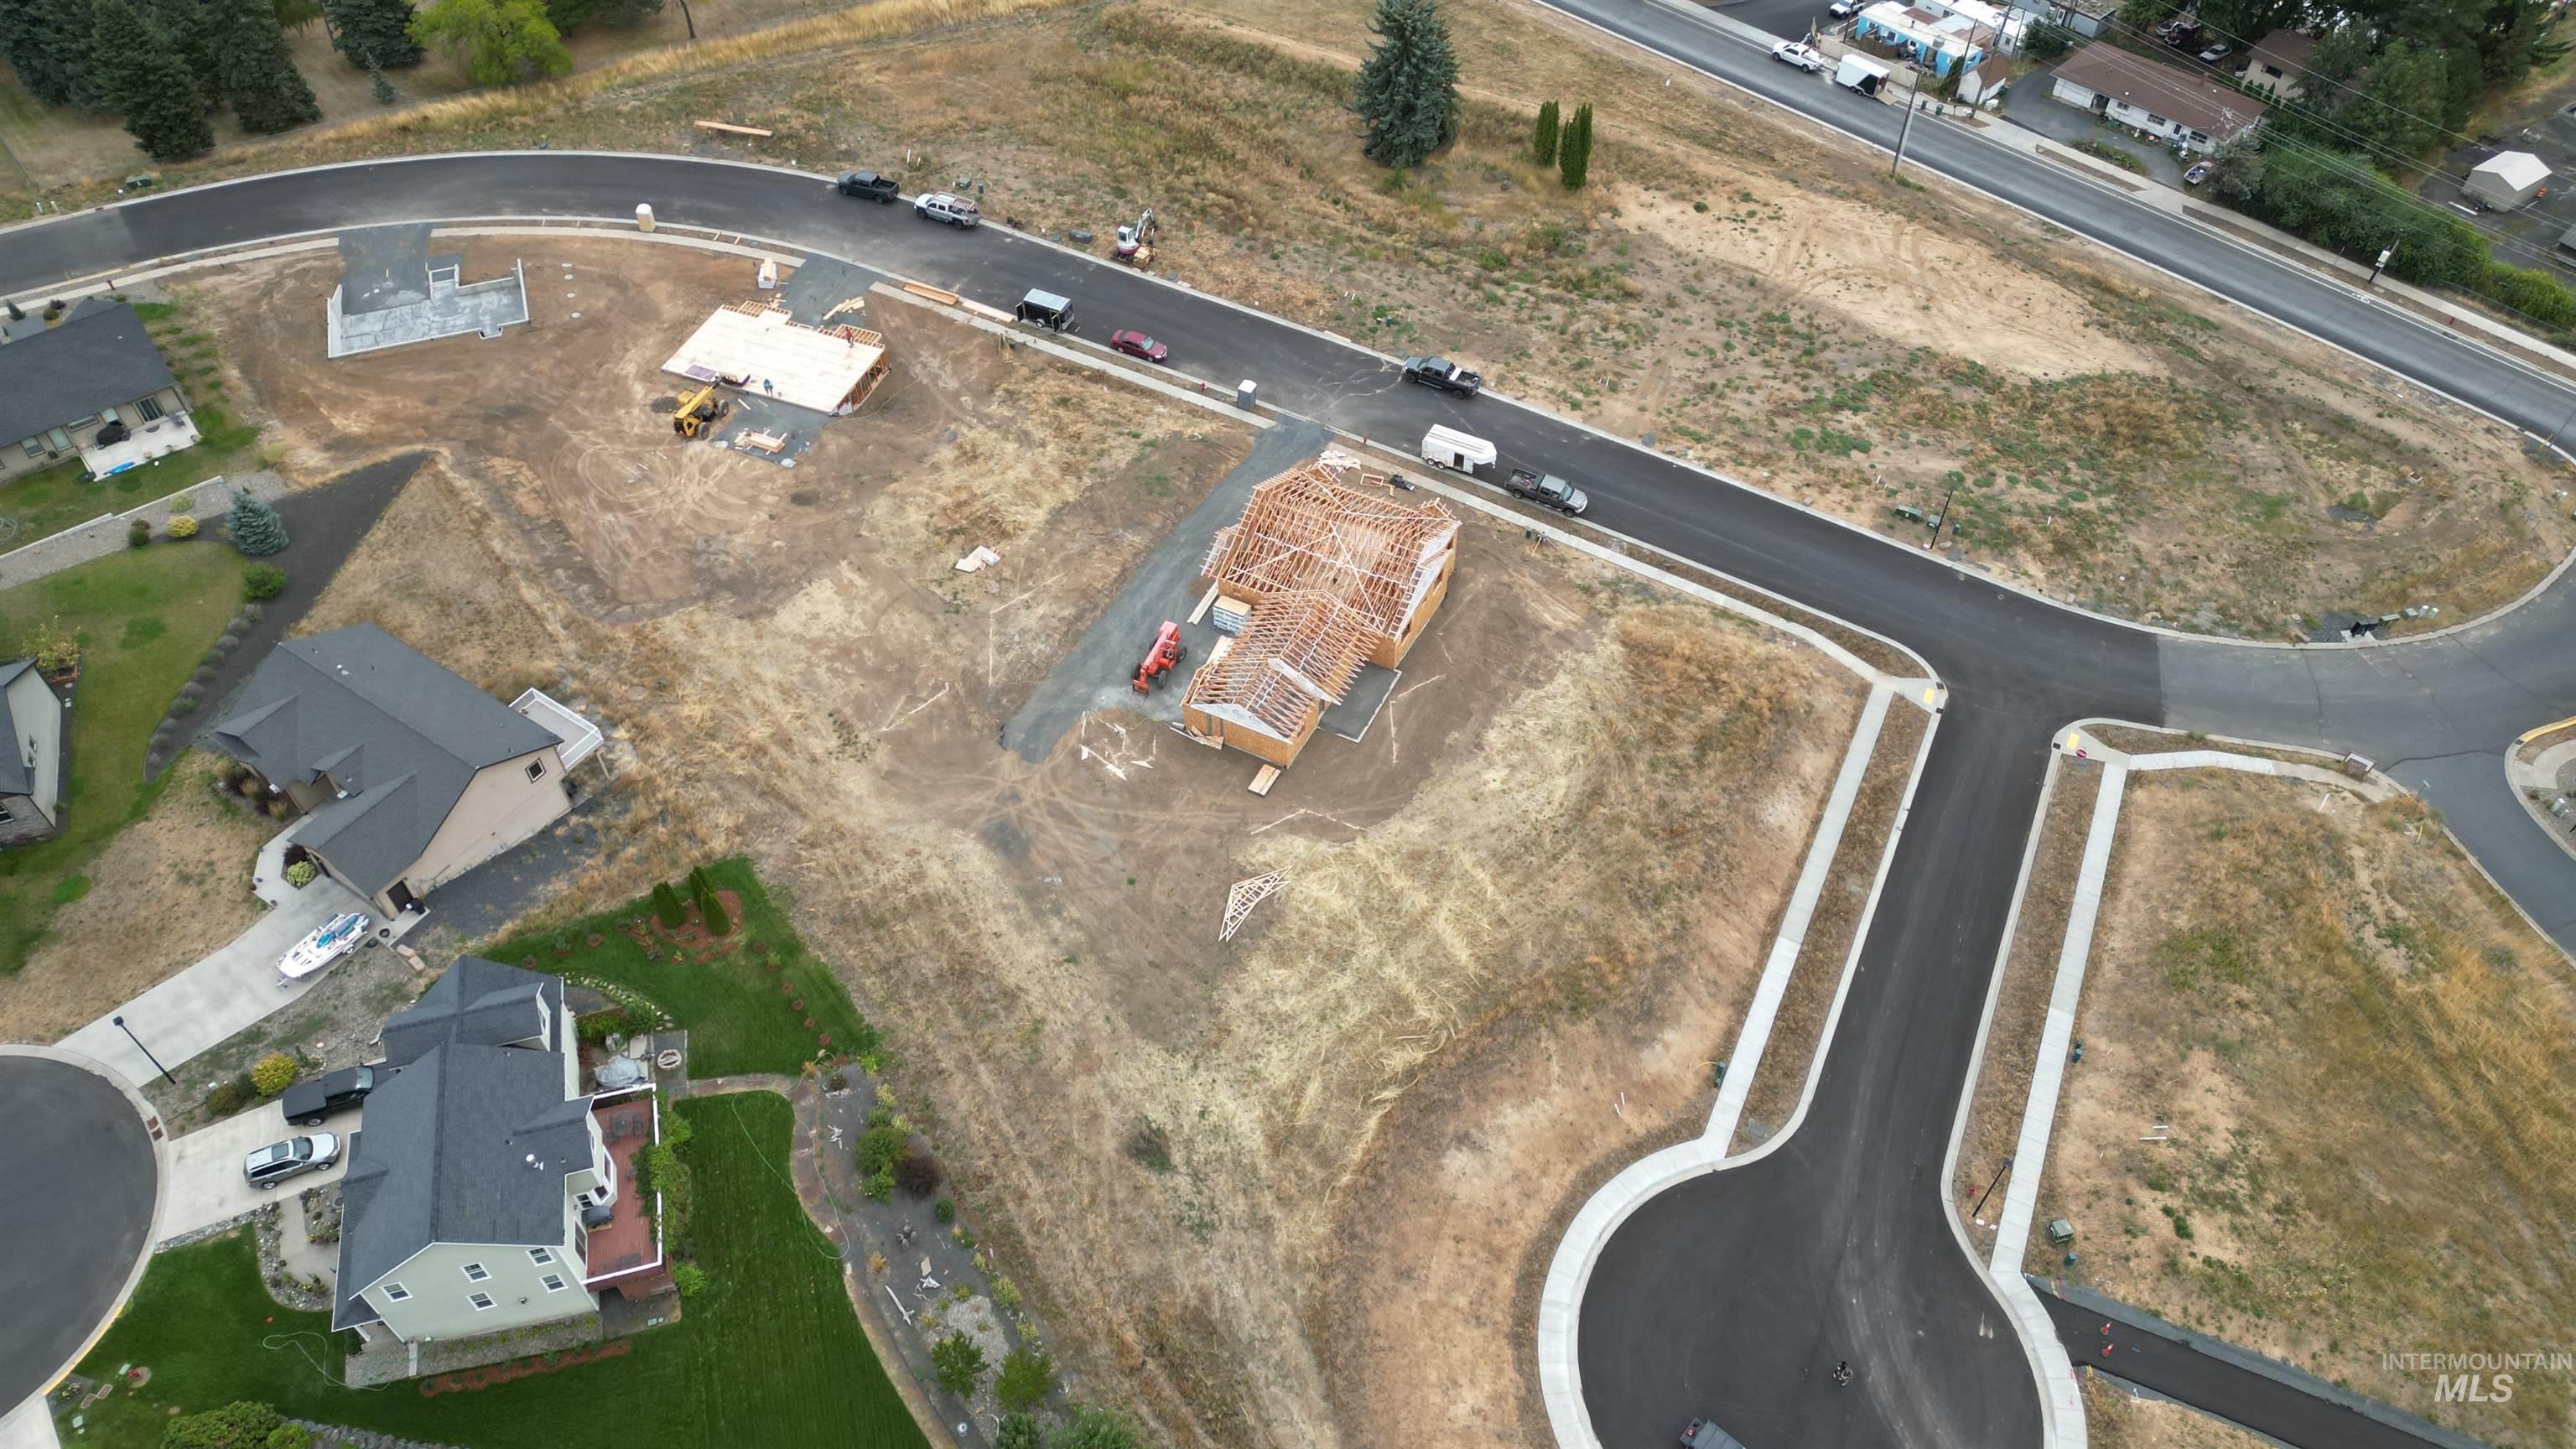 2030 Ben Gifford Court, Moscow, Idaho 83843, Land For Sale, Price $139,000,MLS 98888751